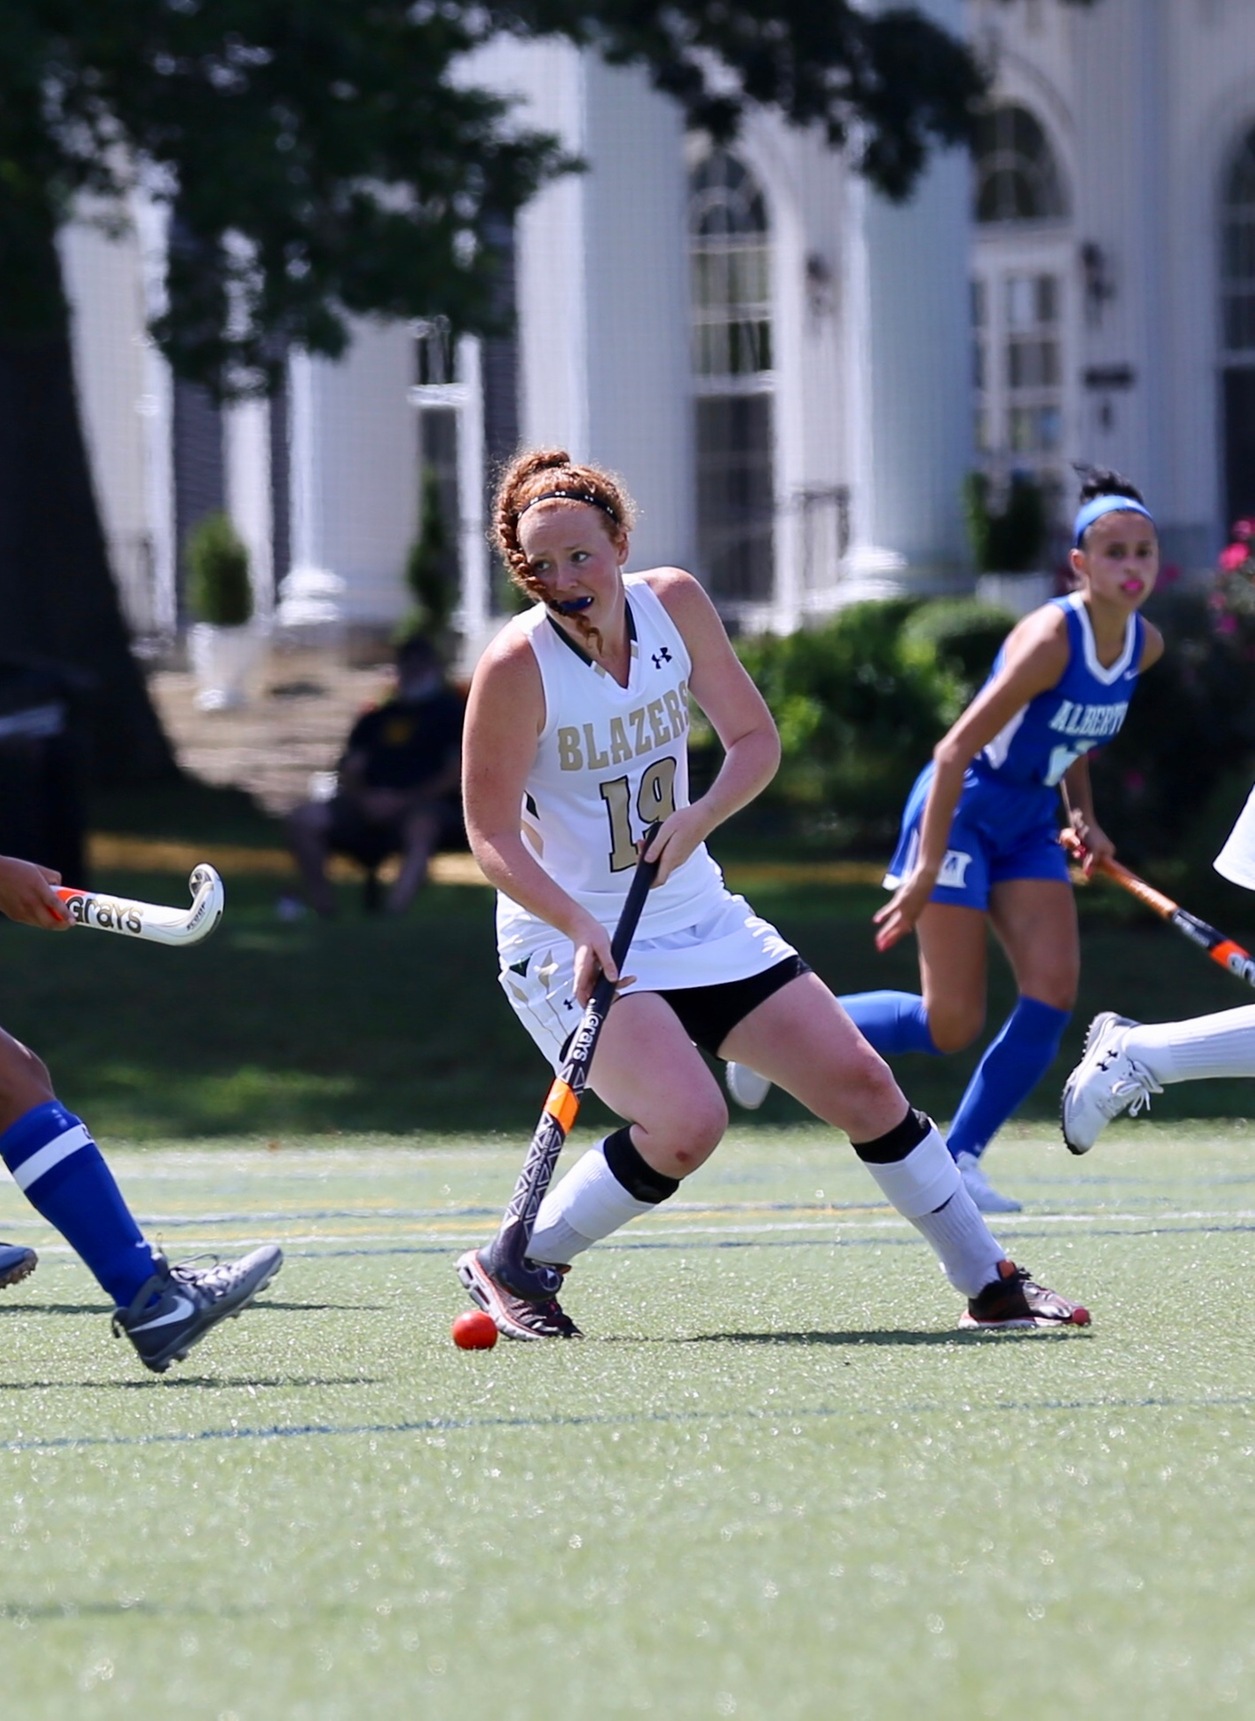 Brittany North Honored as a NFHCA D3 Scholar of Distinction